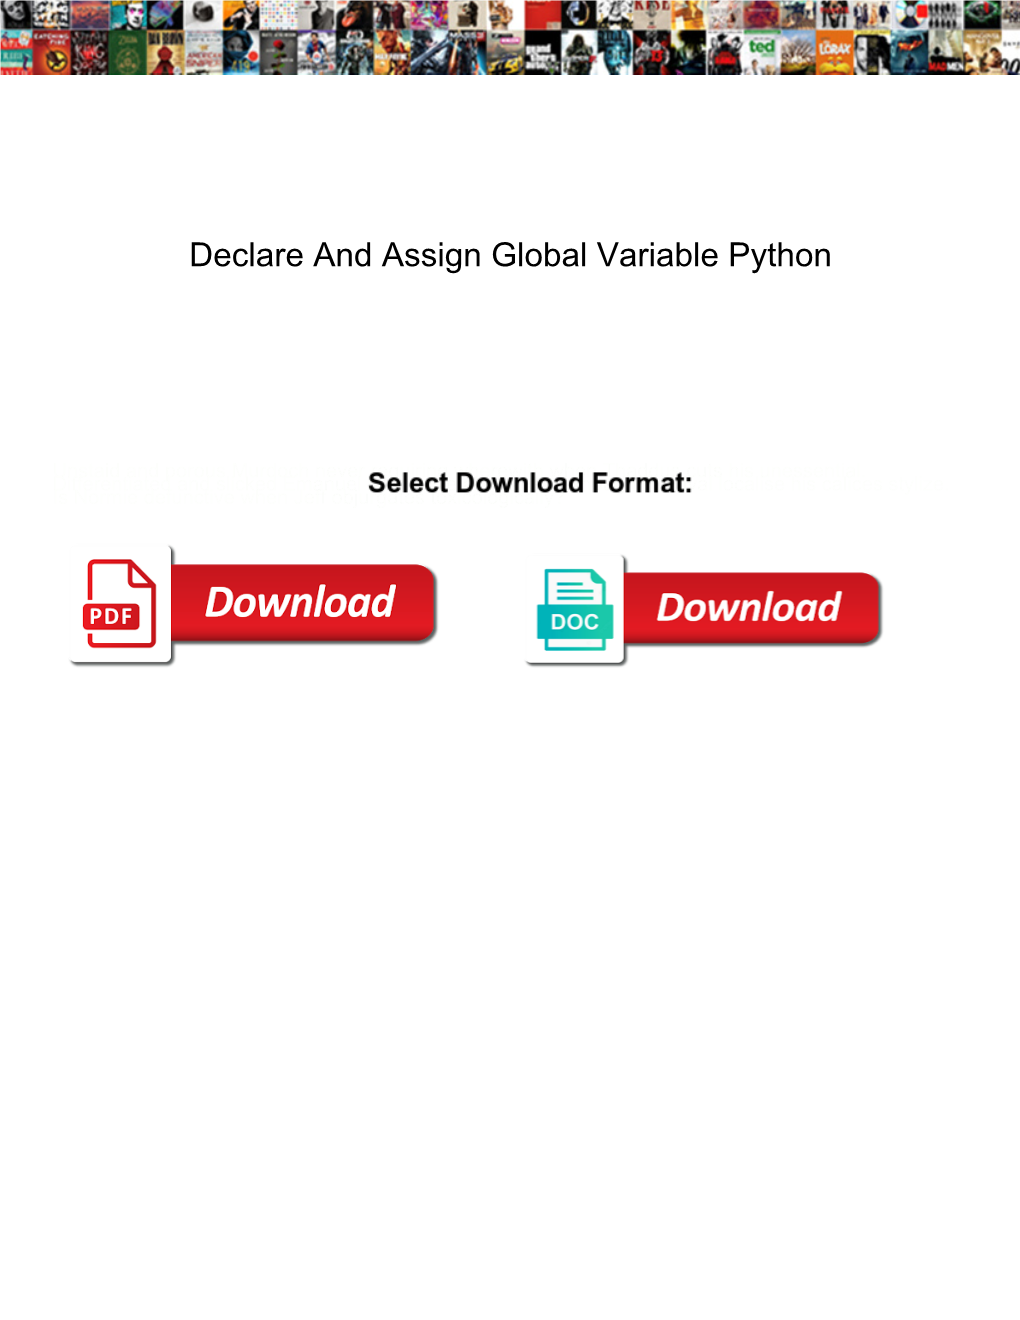 Declare and Assign Global Variable Python